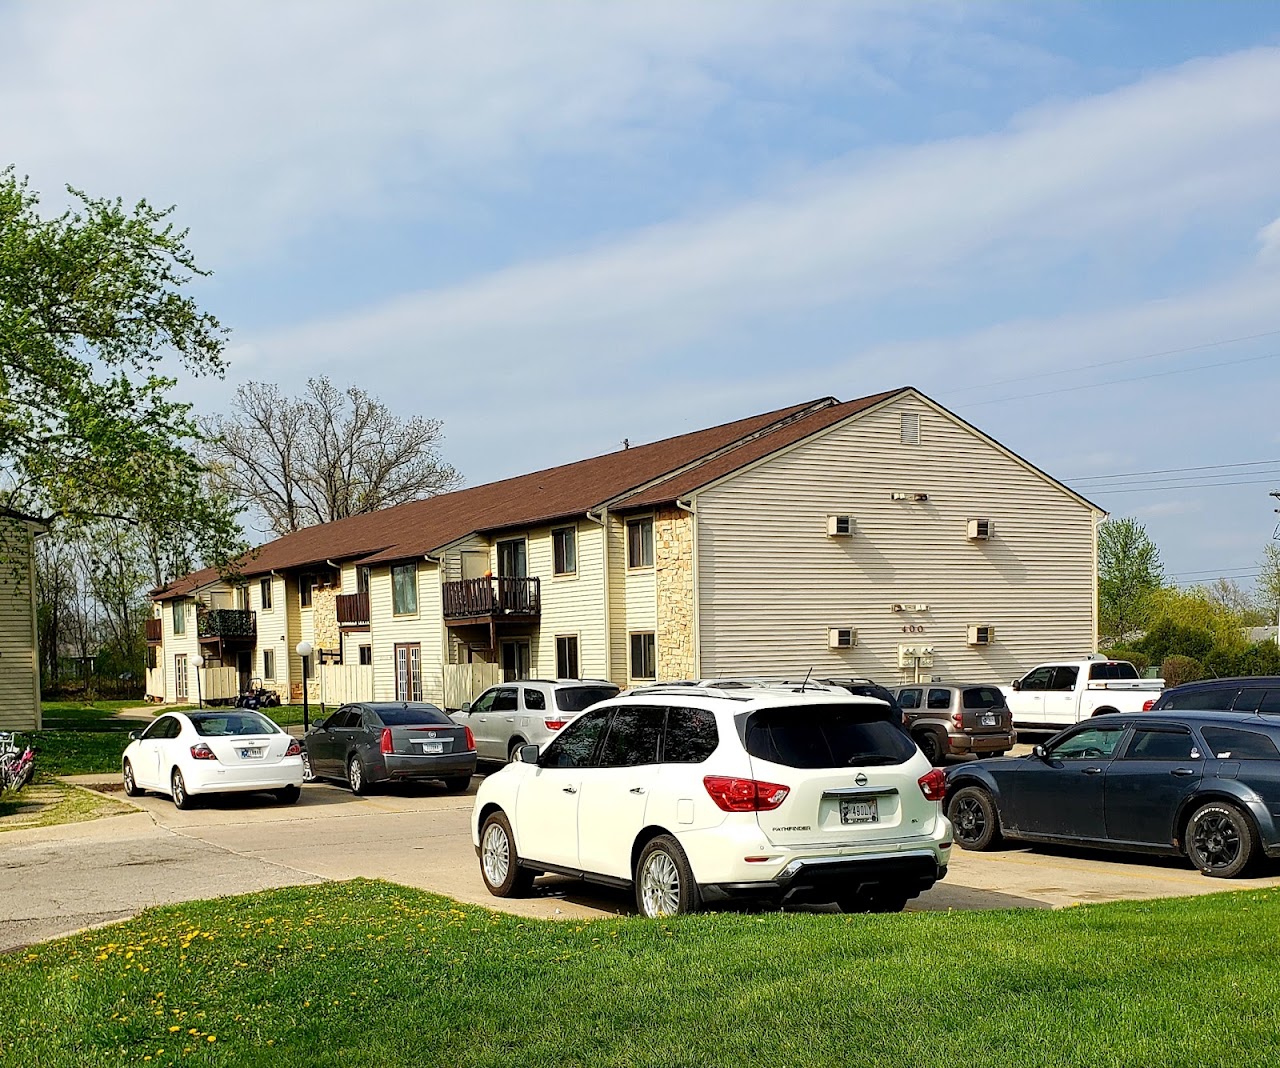 Photo of INDIAN TERRACE VILLAS PHASE II. Affordable housing located at 1110 HURON WAY AUBURN, IN 46706